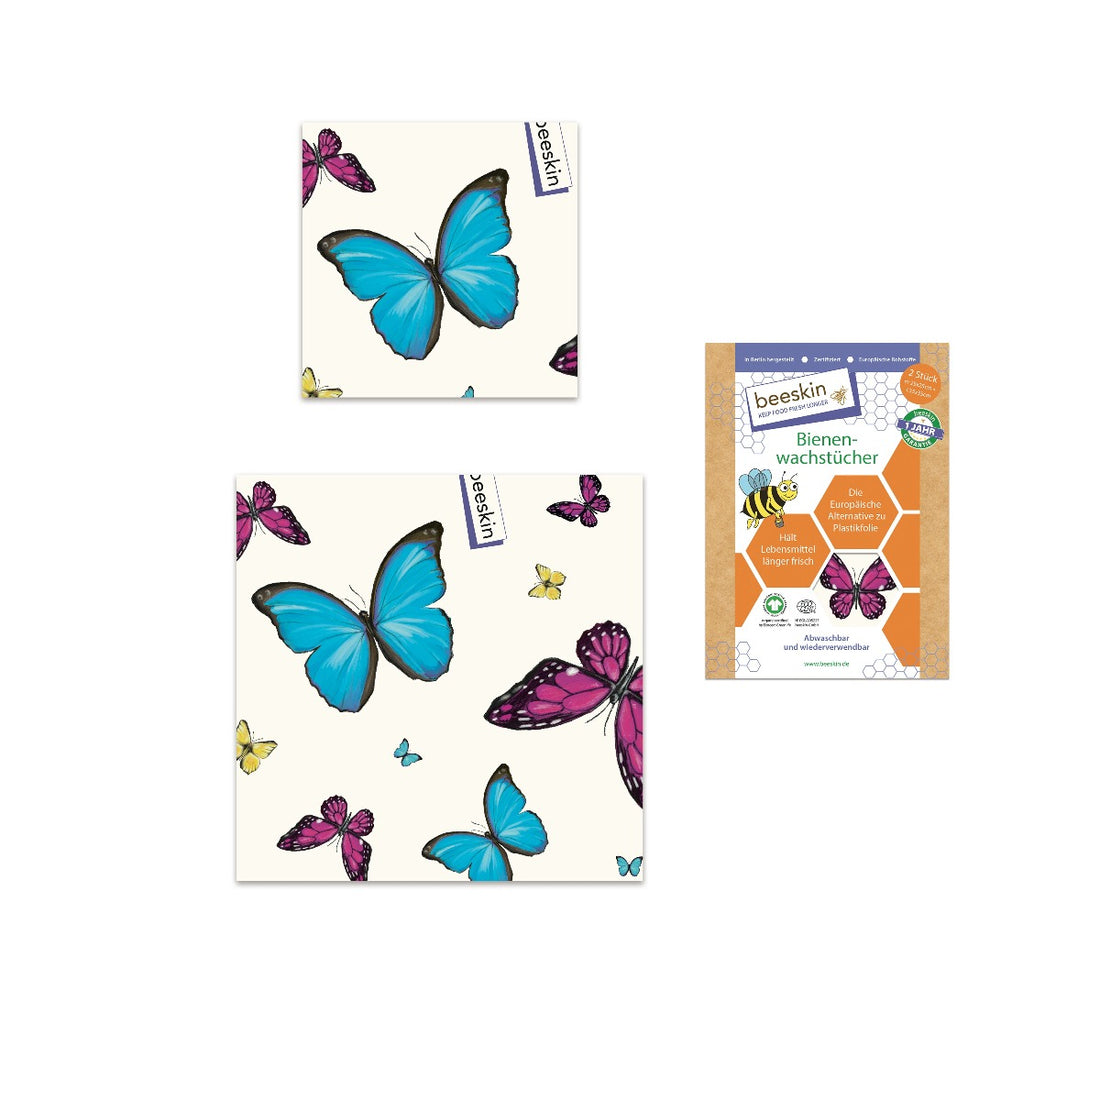 beeskin m+l set beeswax wraps in butterflies design next to packaging